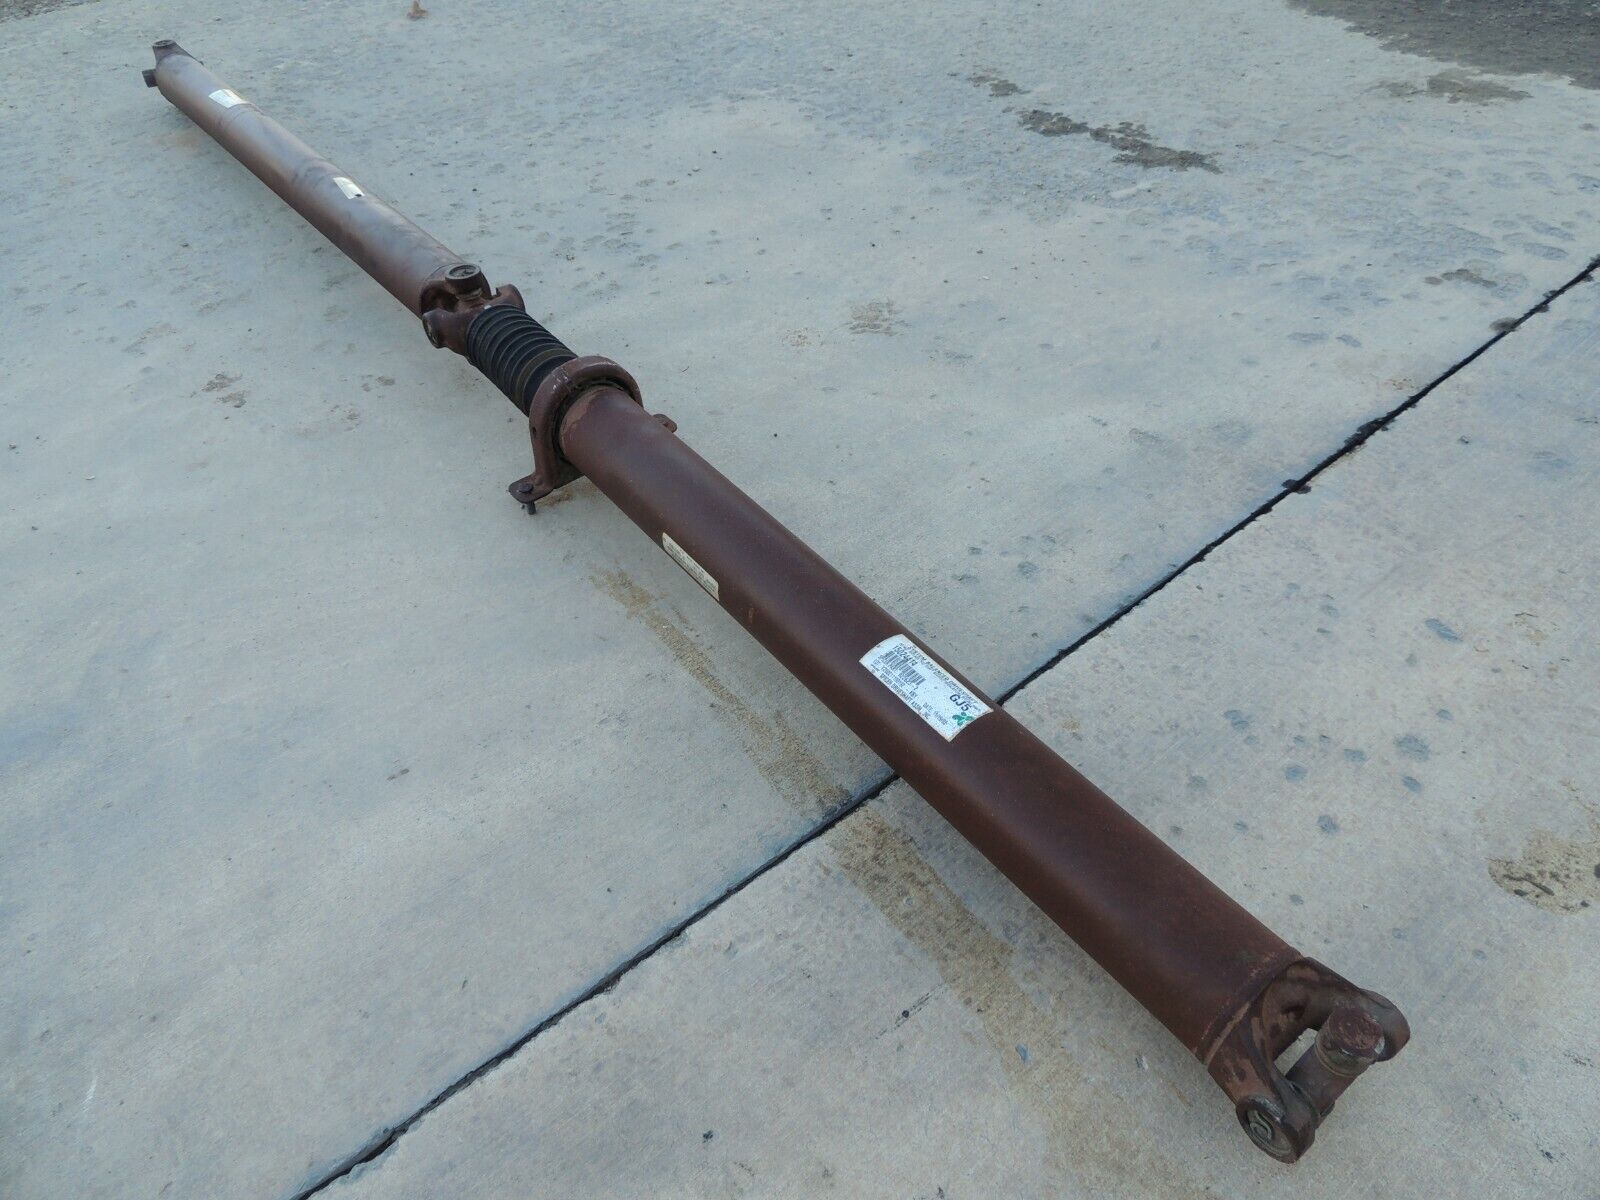 2001-2007 Chevy/GMC DURAMAX 2WD DRIVE SHAFT-EXT CAB LONG BED 15024414 GENUINE